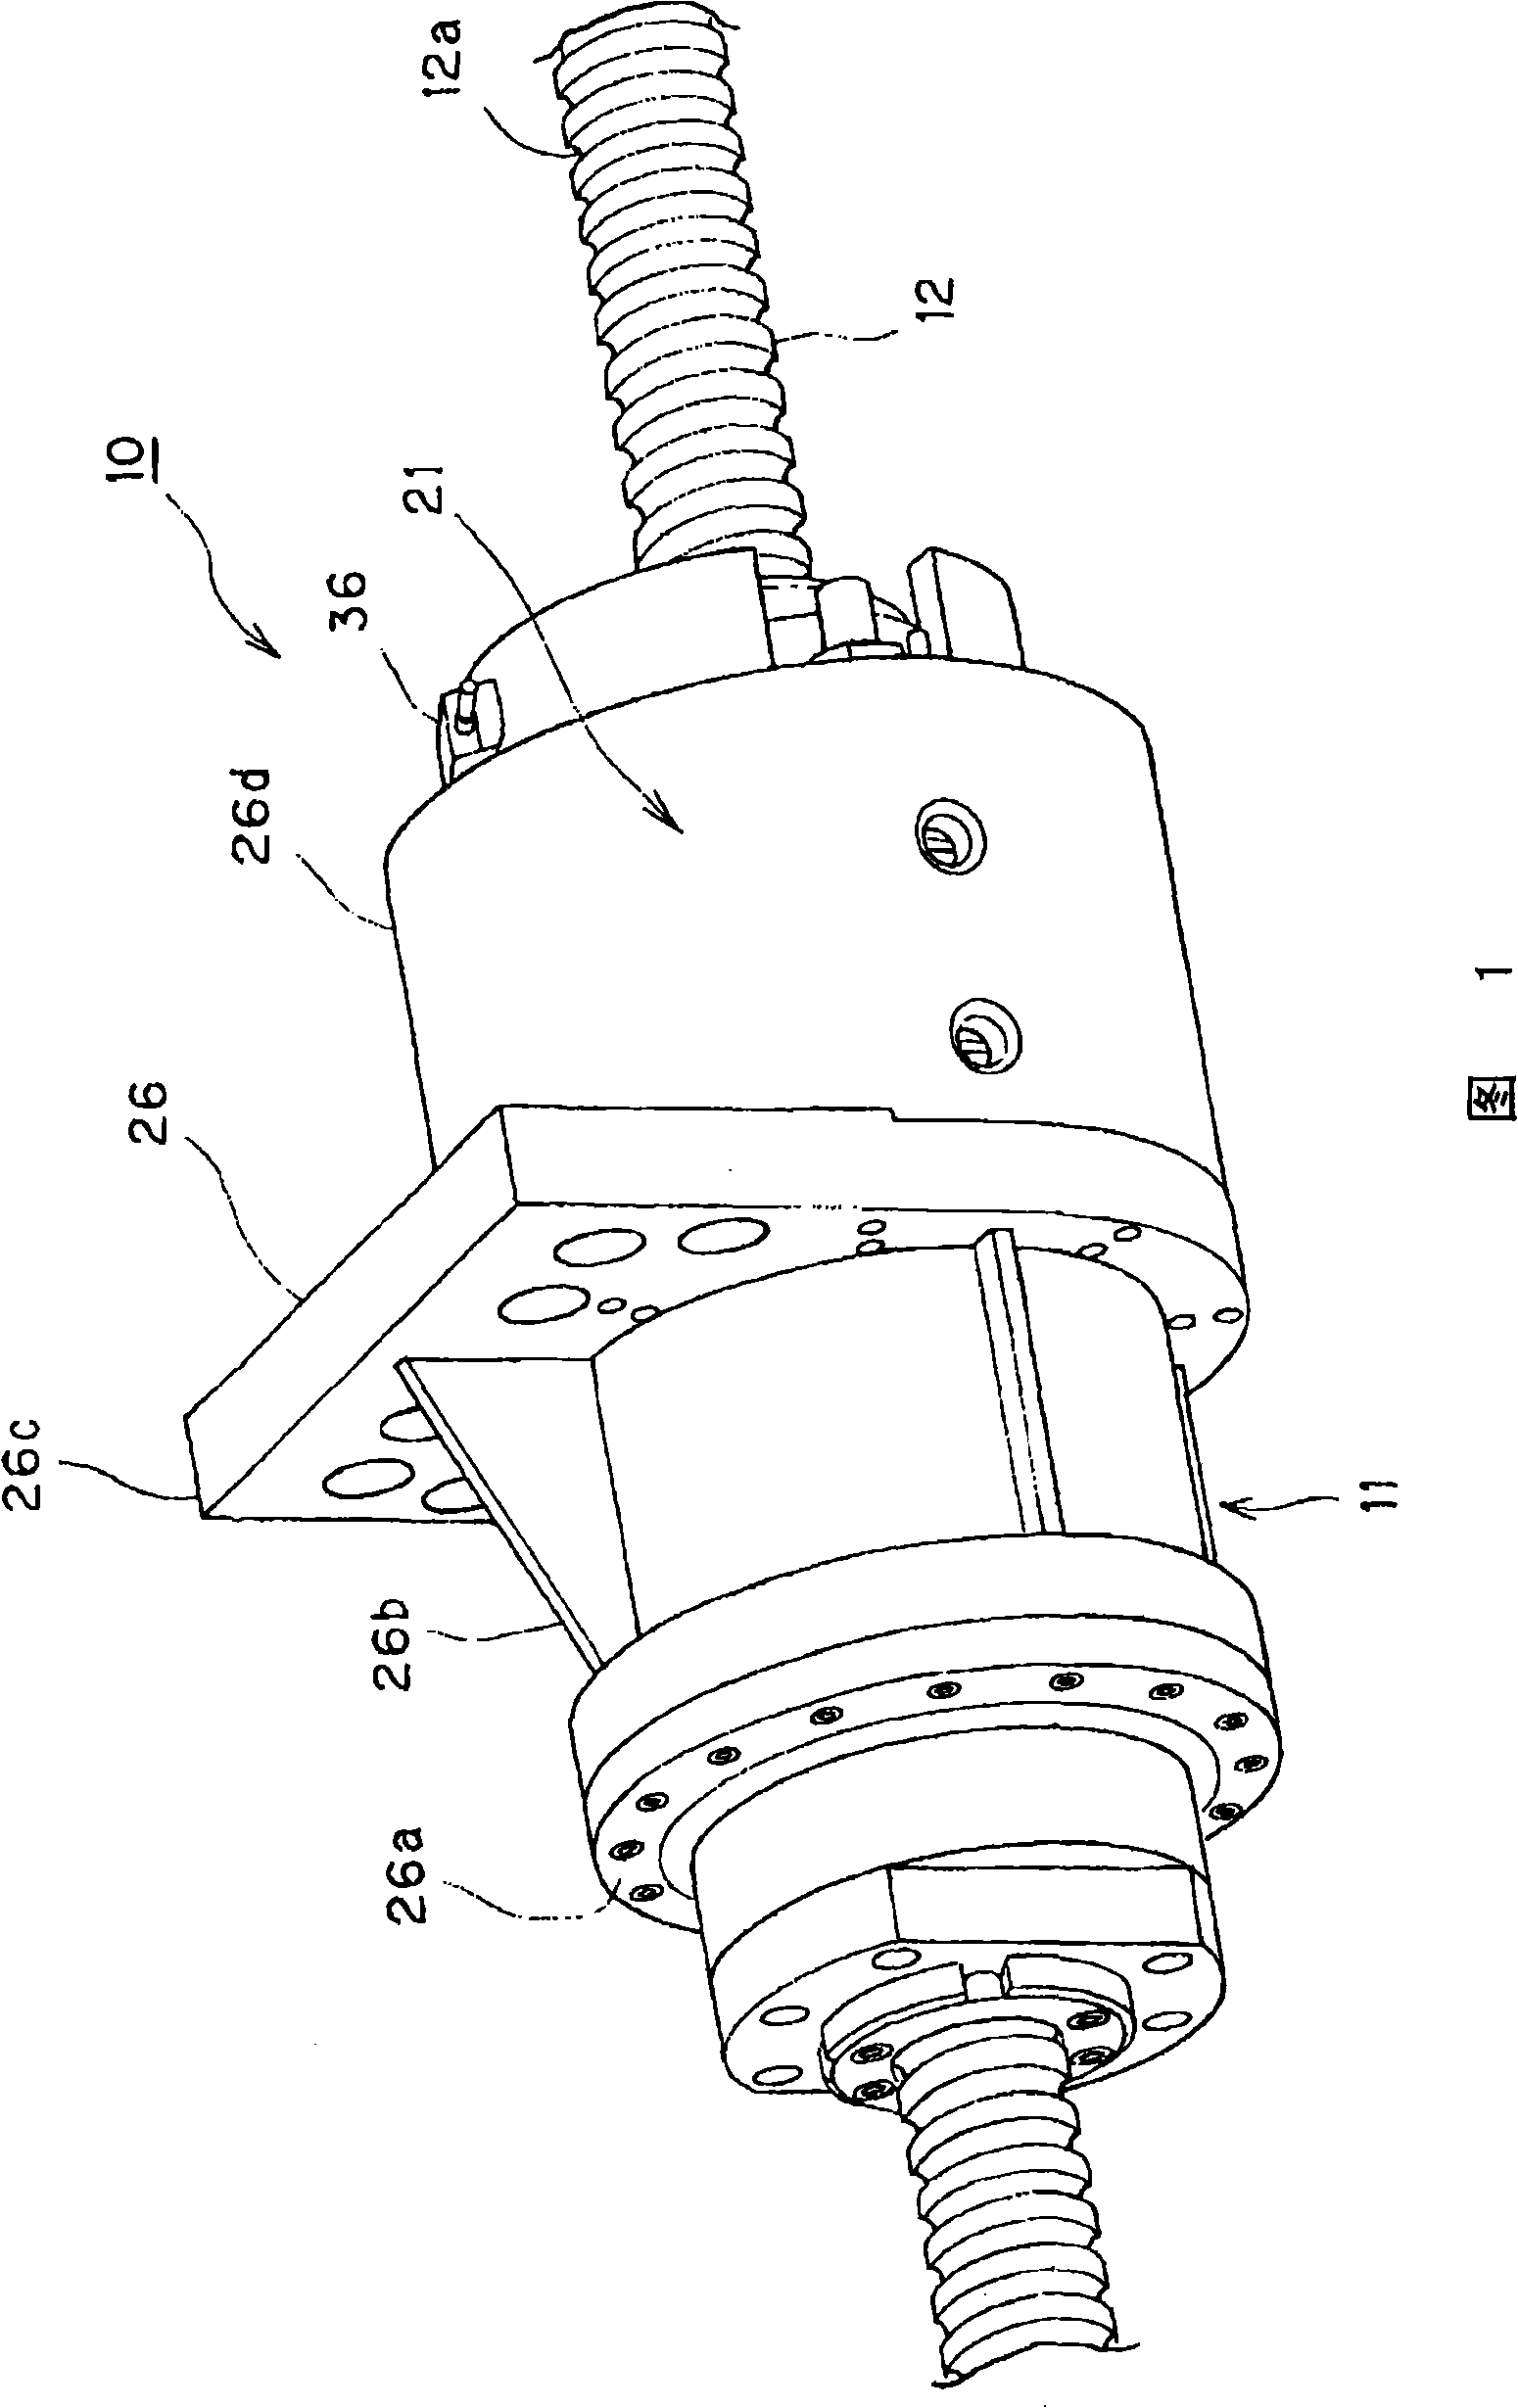 Hollow motor drive device